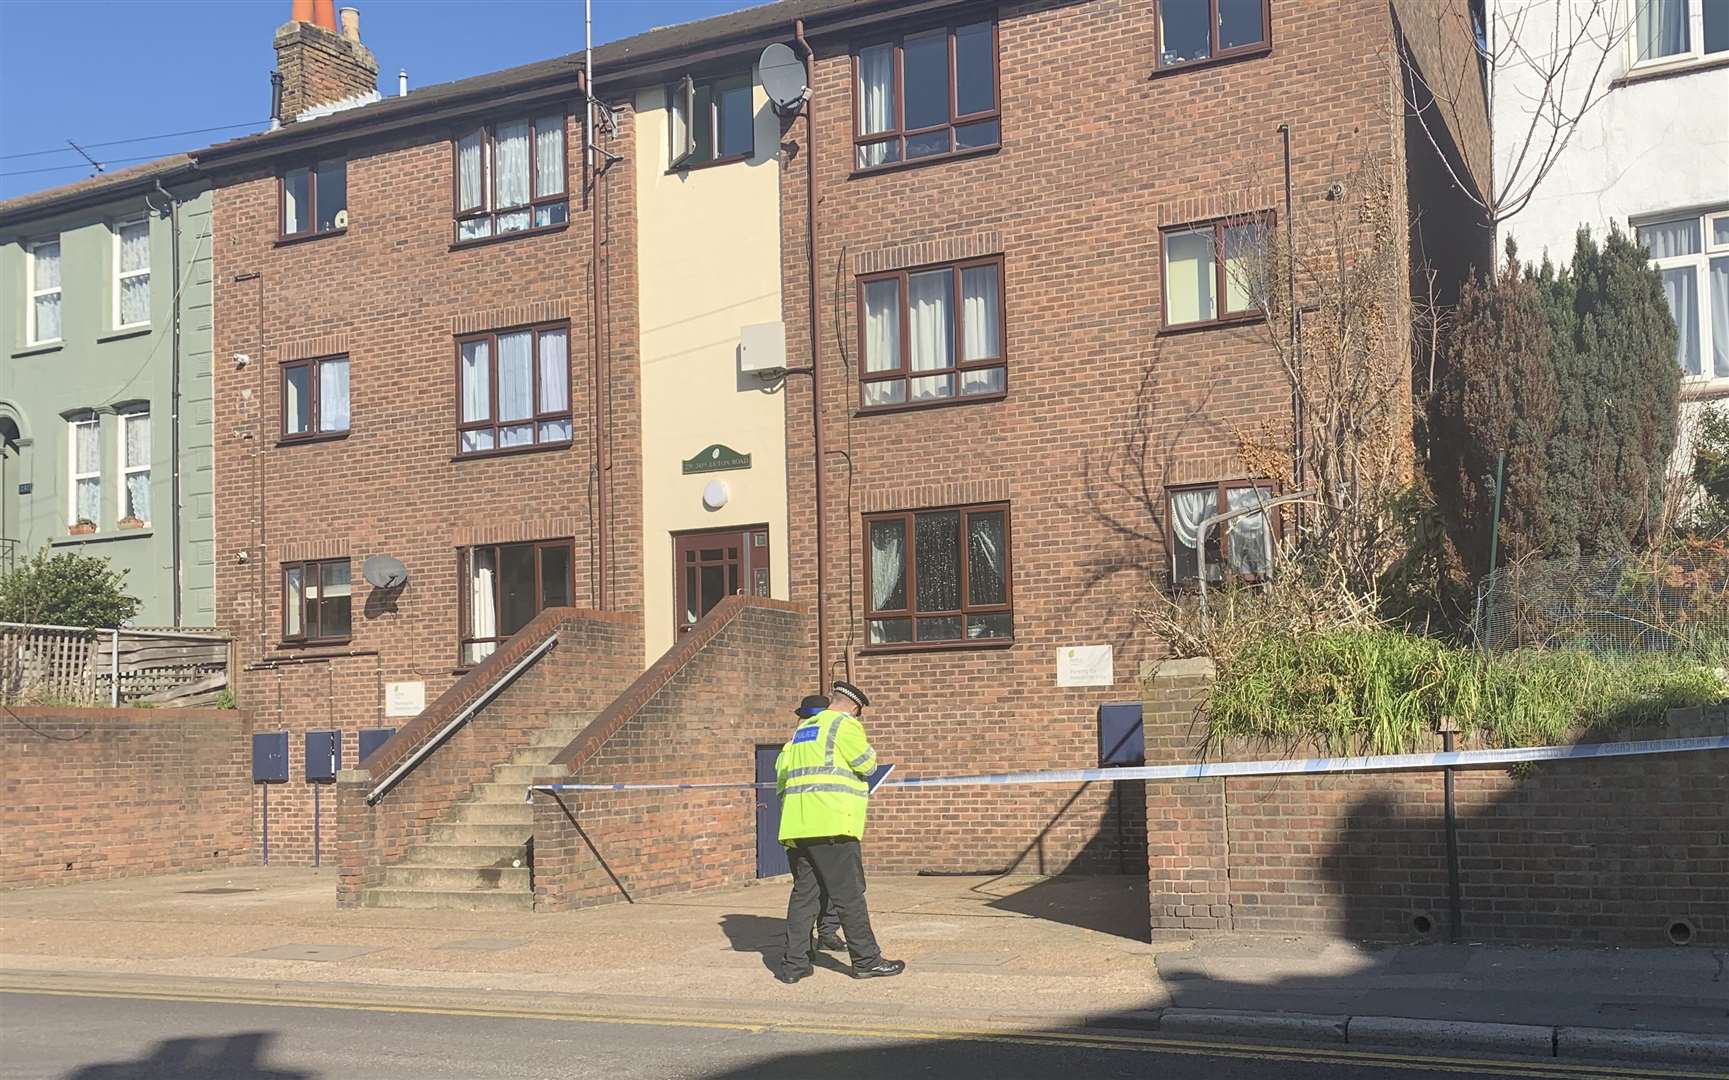 Police have cordoned off a property in Luton Road (7433207)